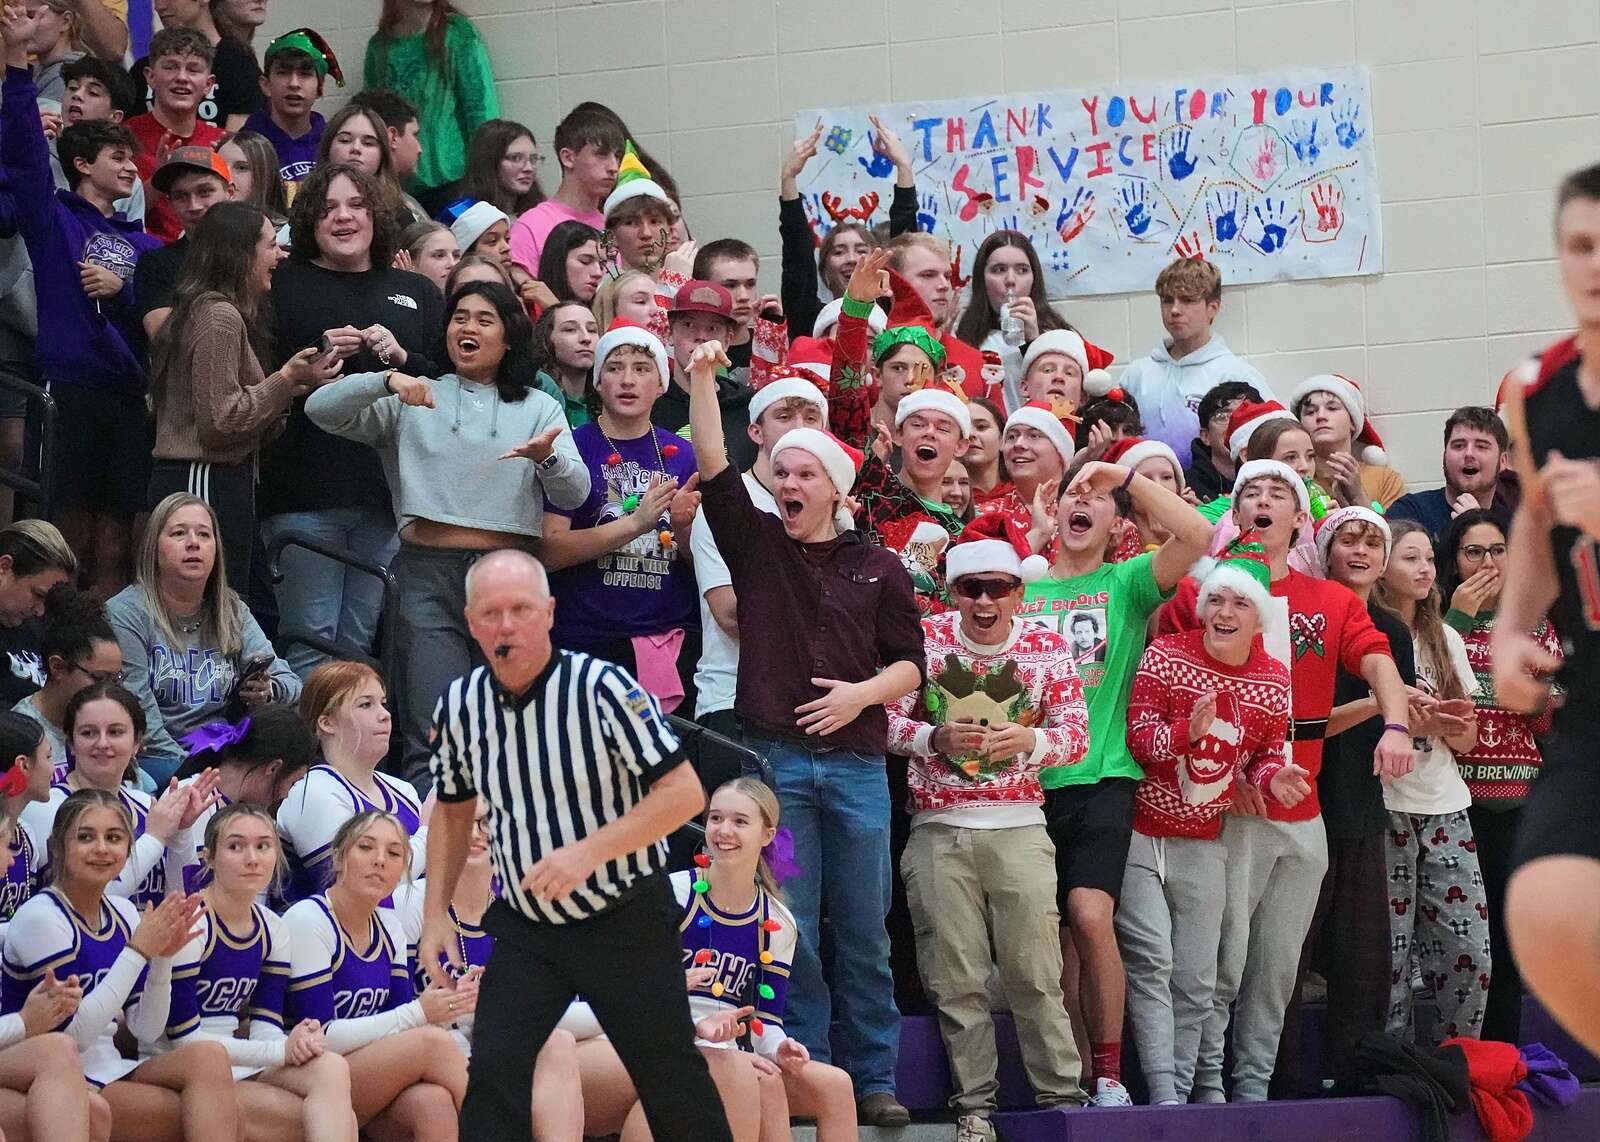 The student section at Karns City cheers on the Gremlin's boys basketball team